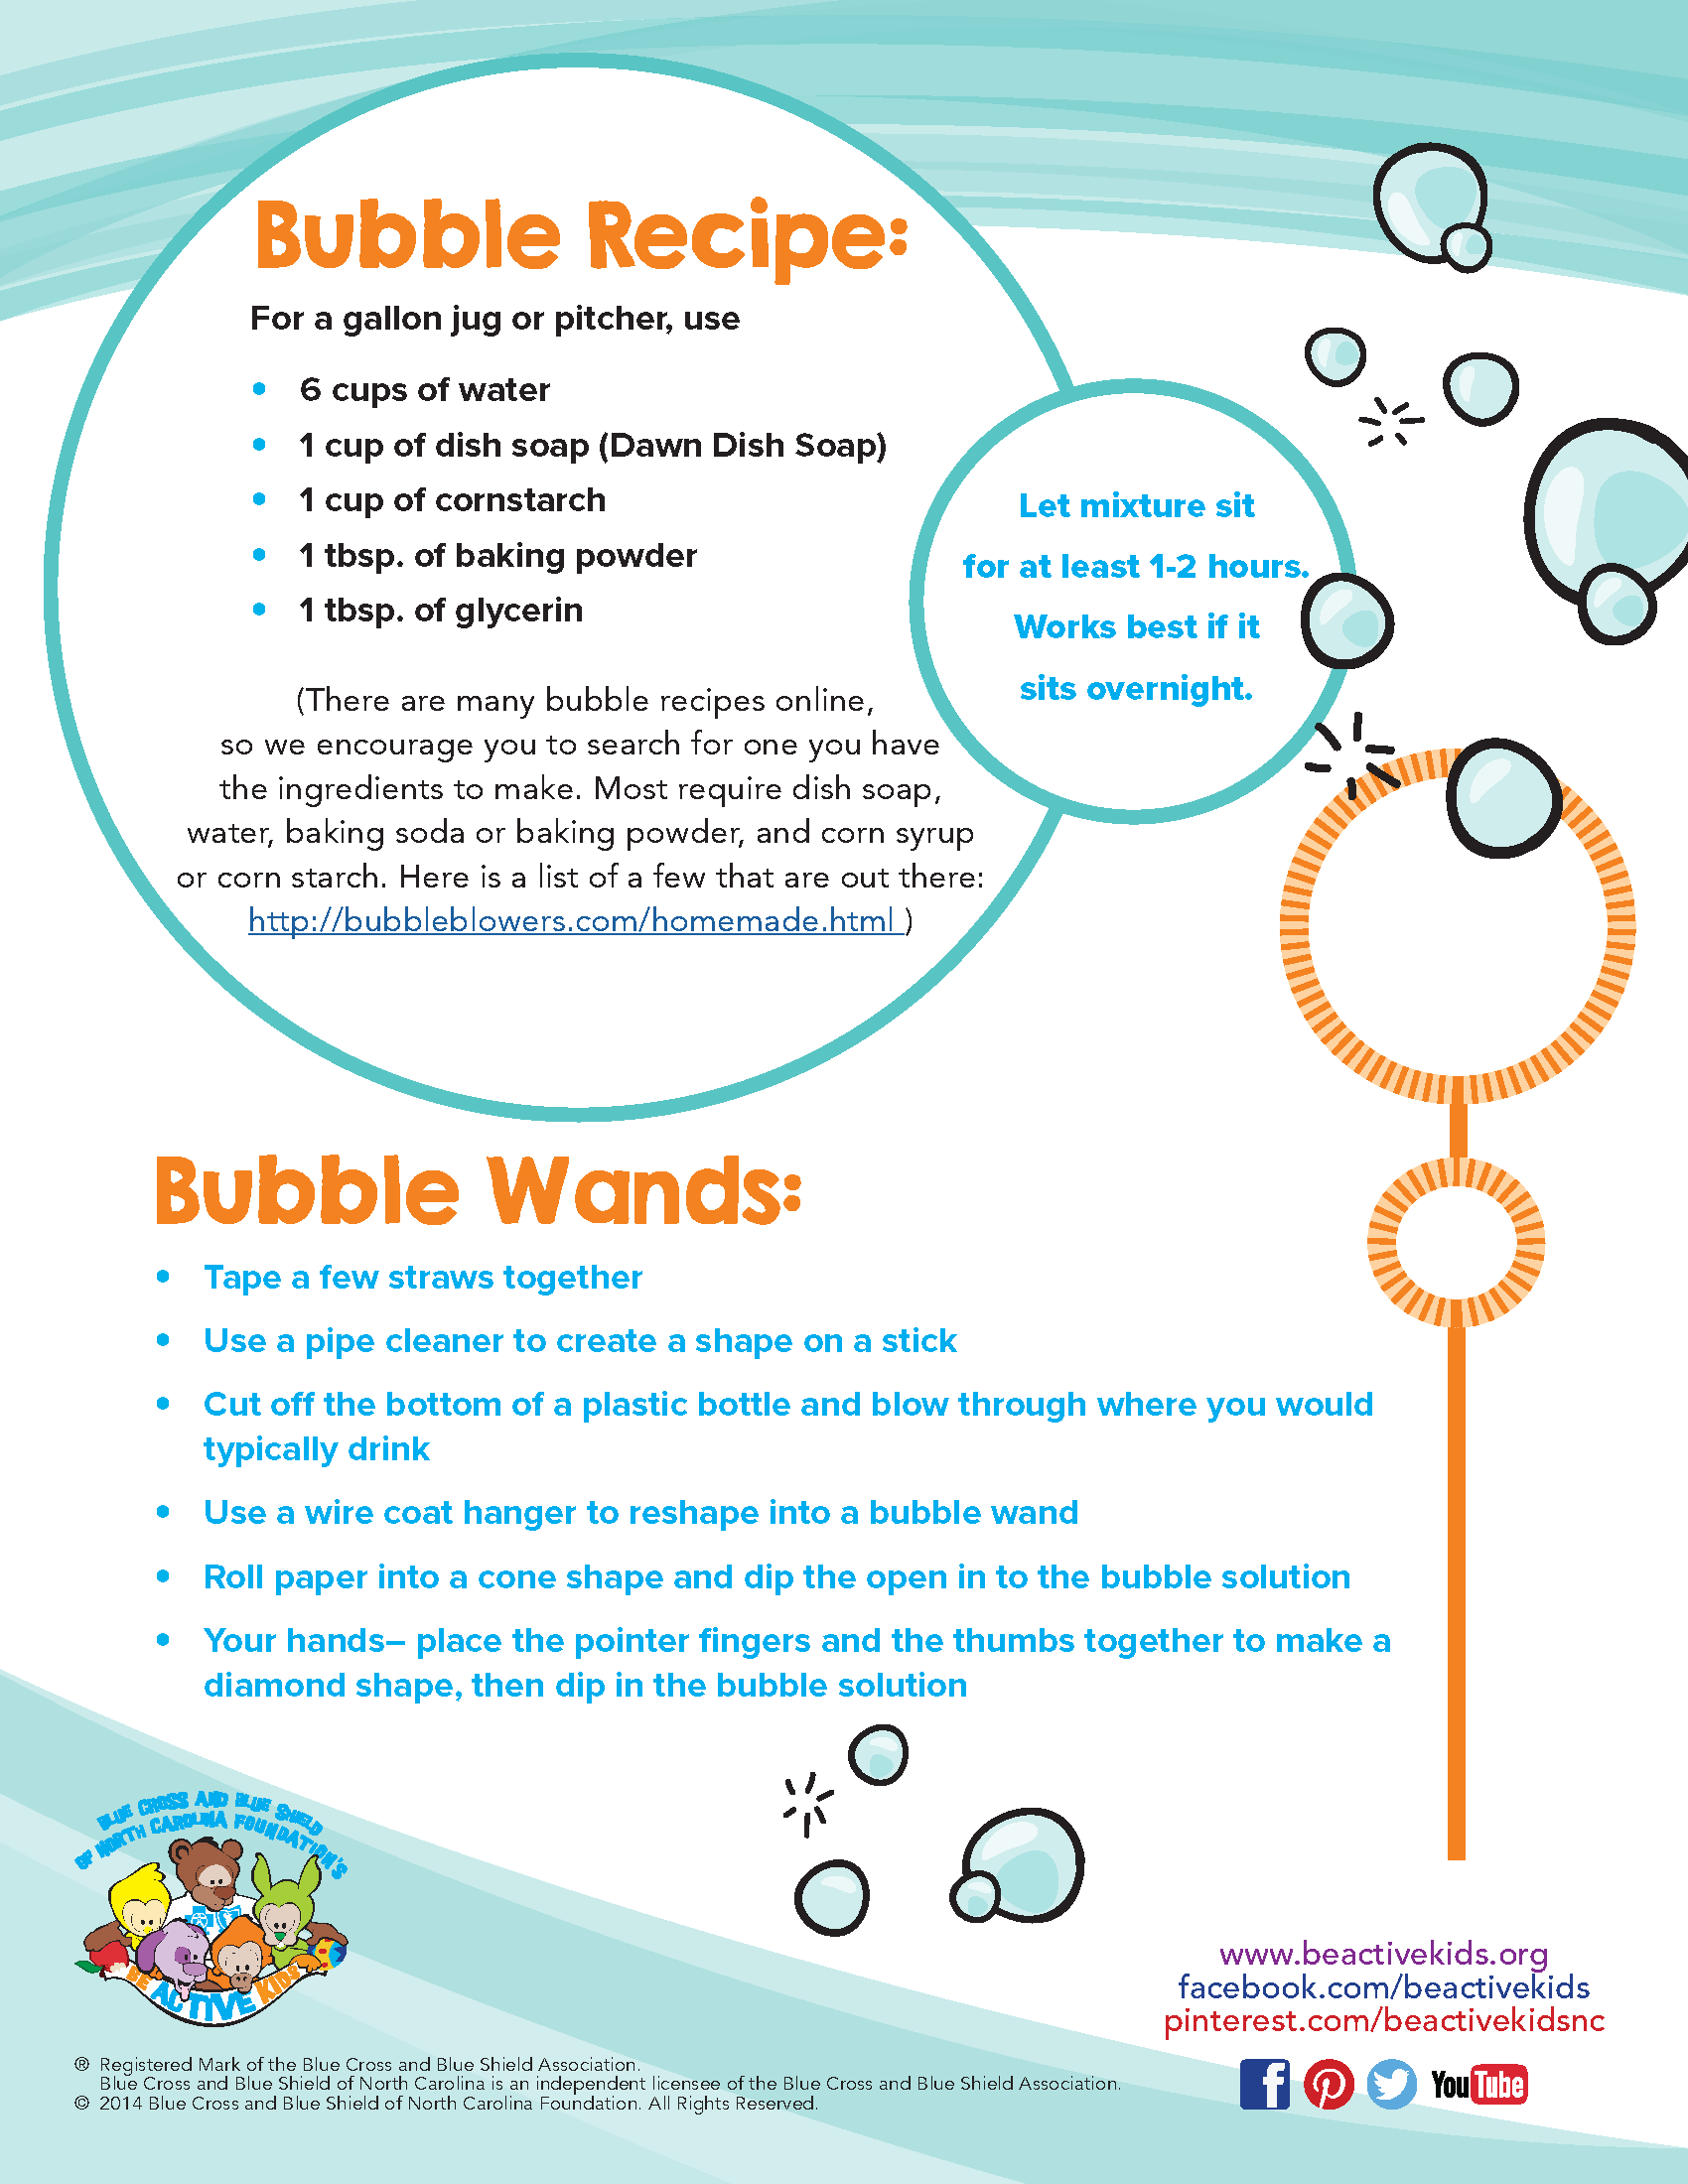 How to Make Bubbles and Bubble Wands